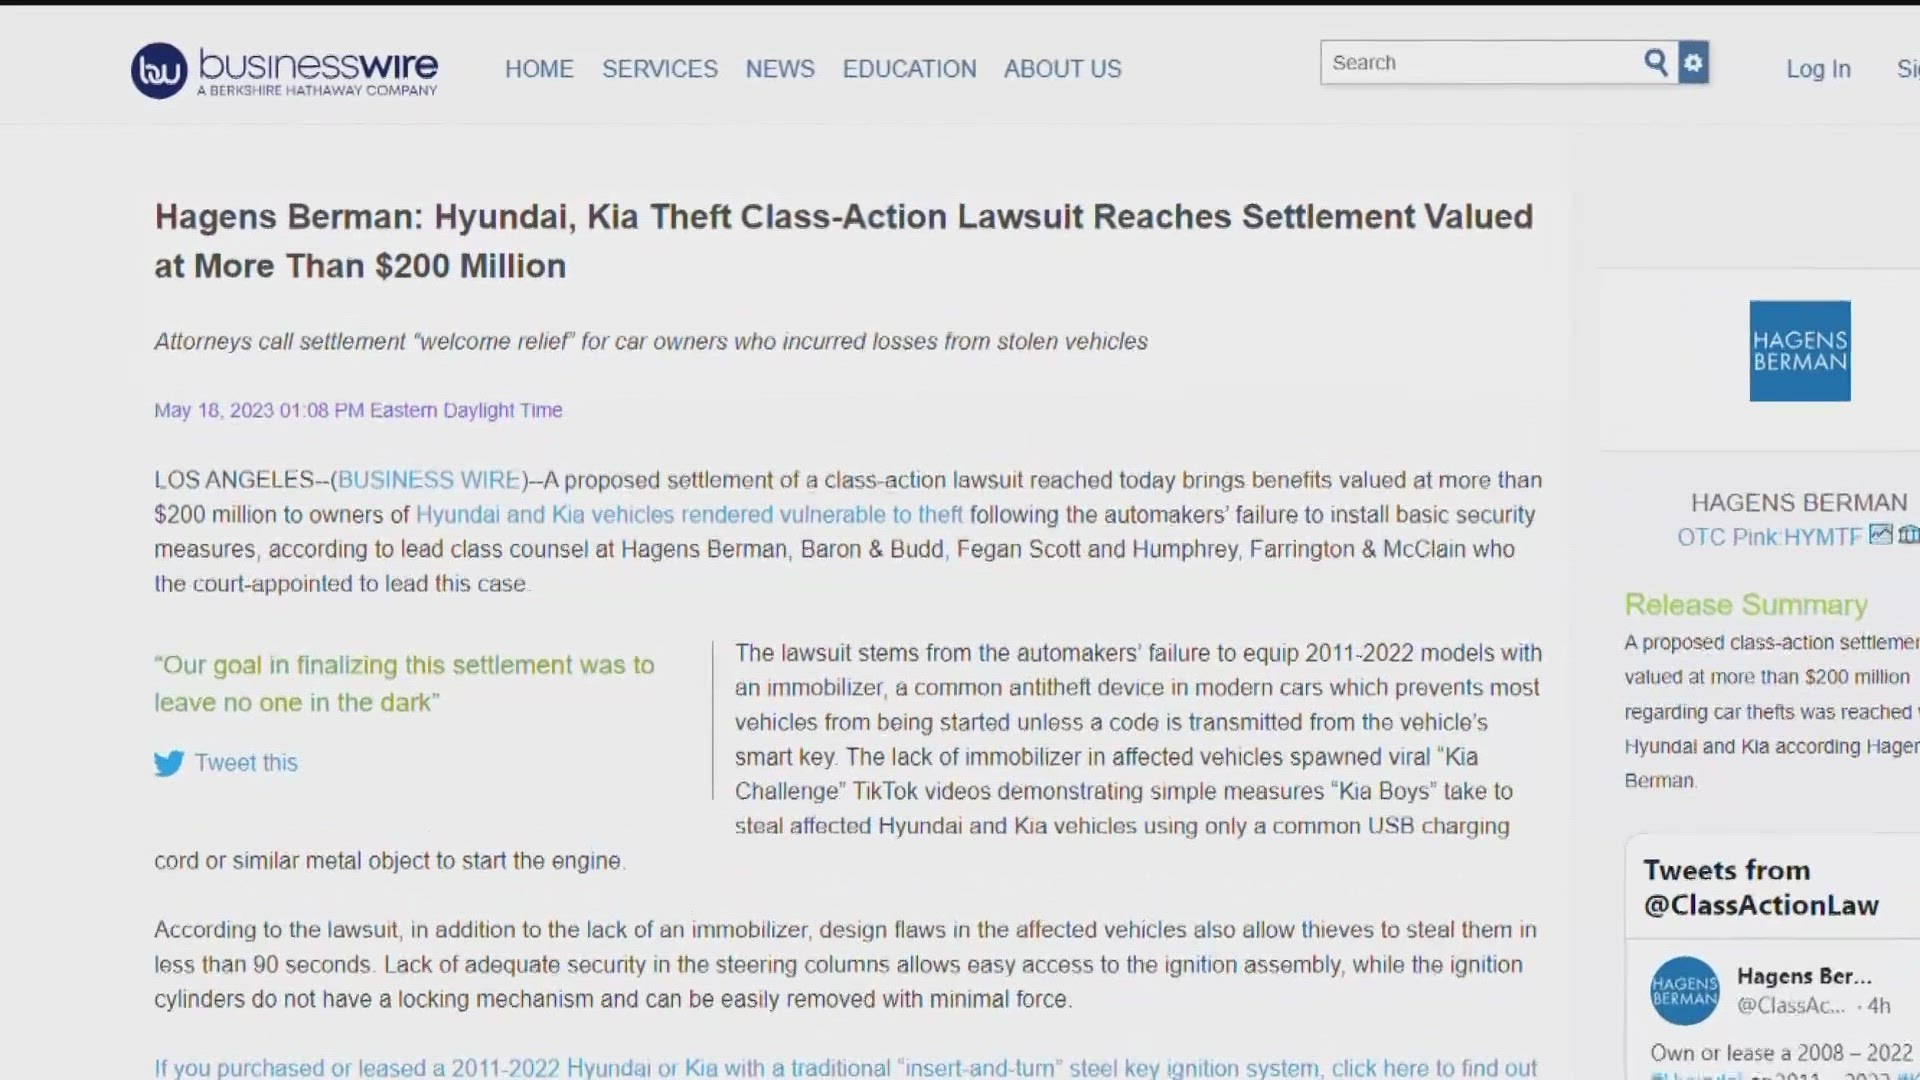 A 200-MILLION DOLLAR CLASS ACTION SETTLEMENT PROMISES TO HELP PEOPLE WHO HAD THEIR CARS STOLEN.